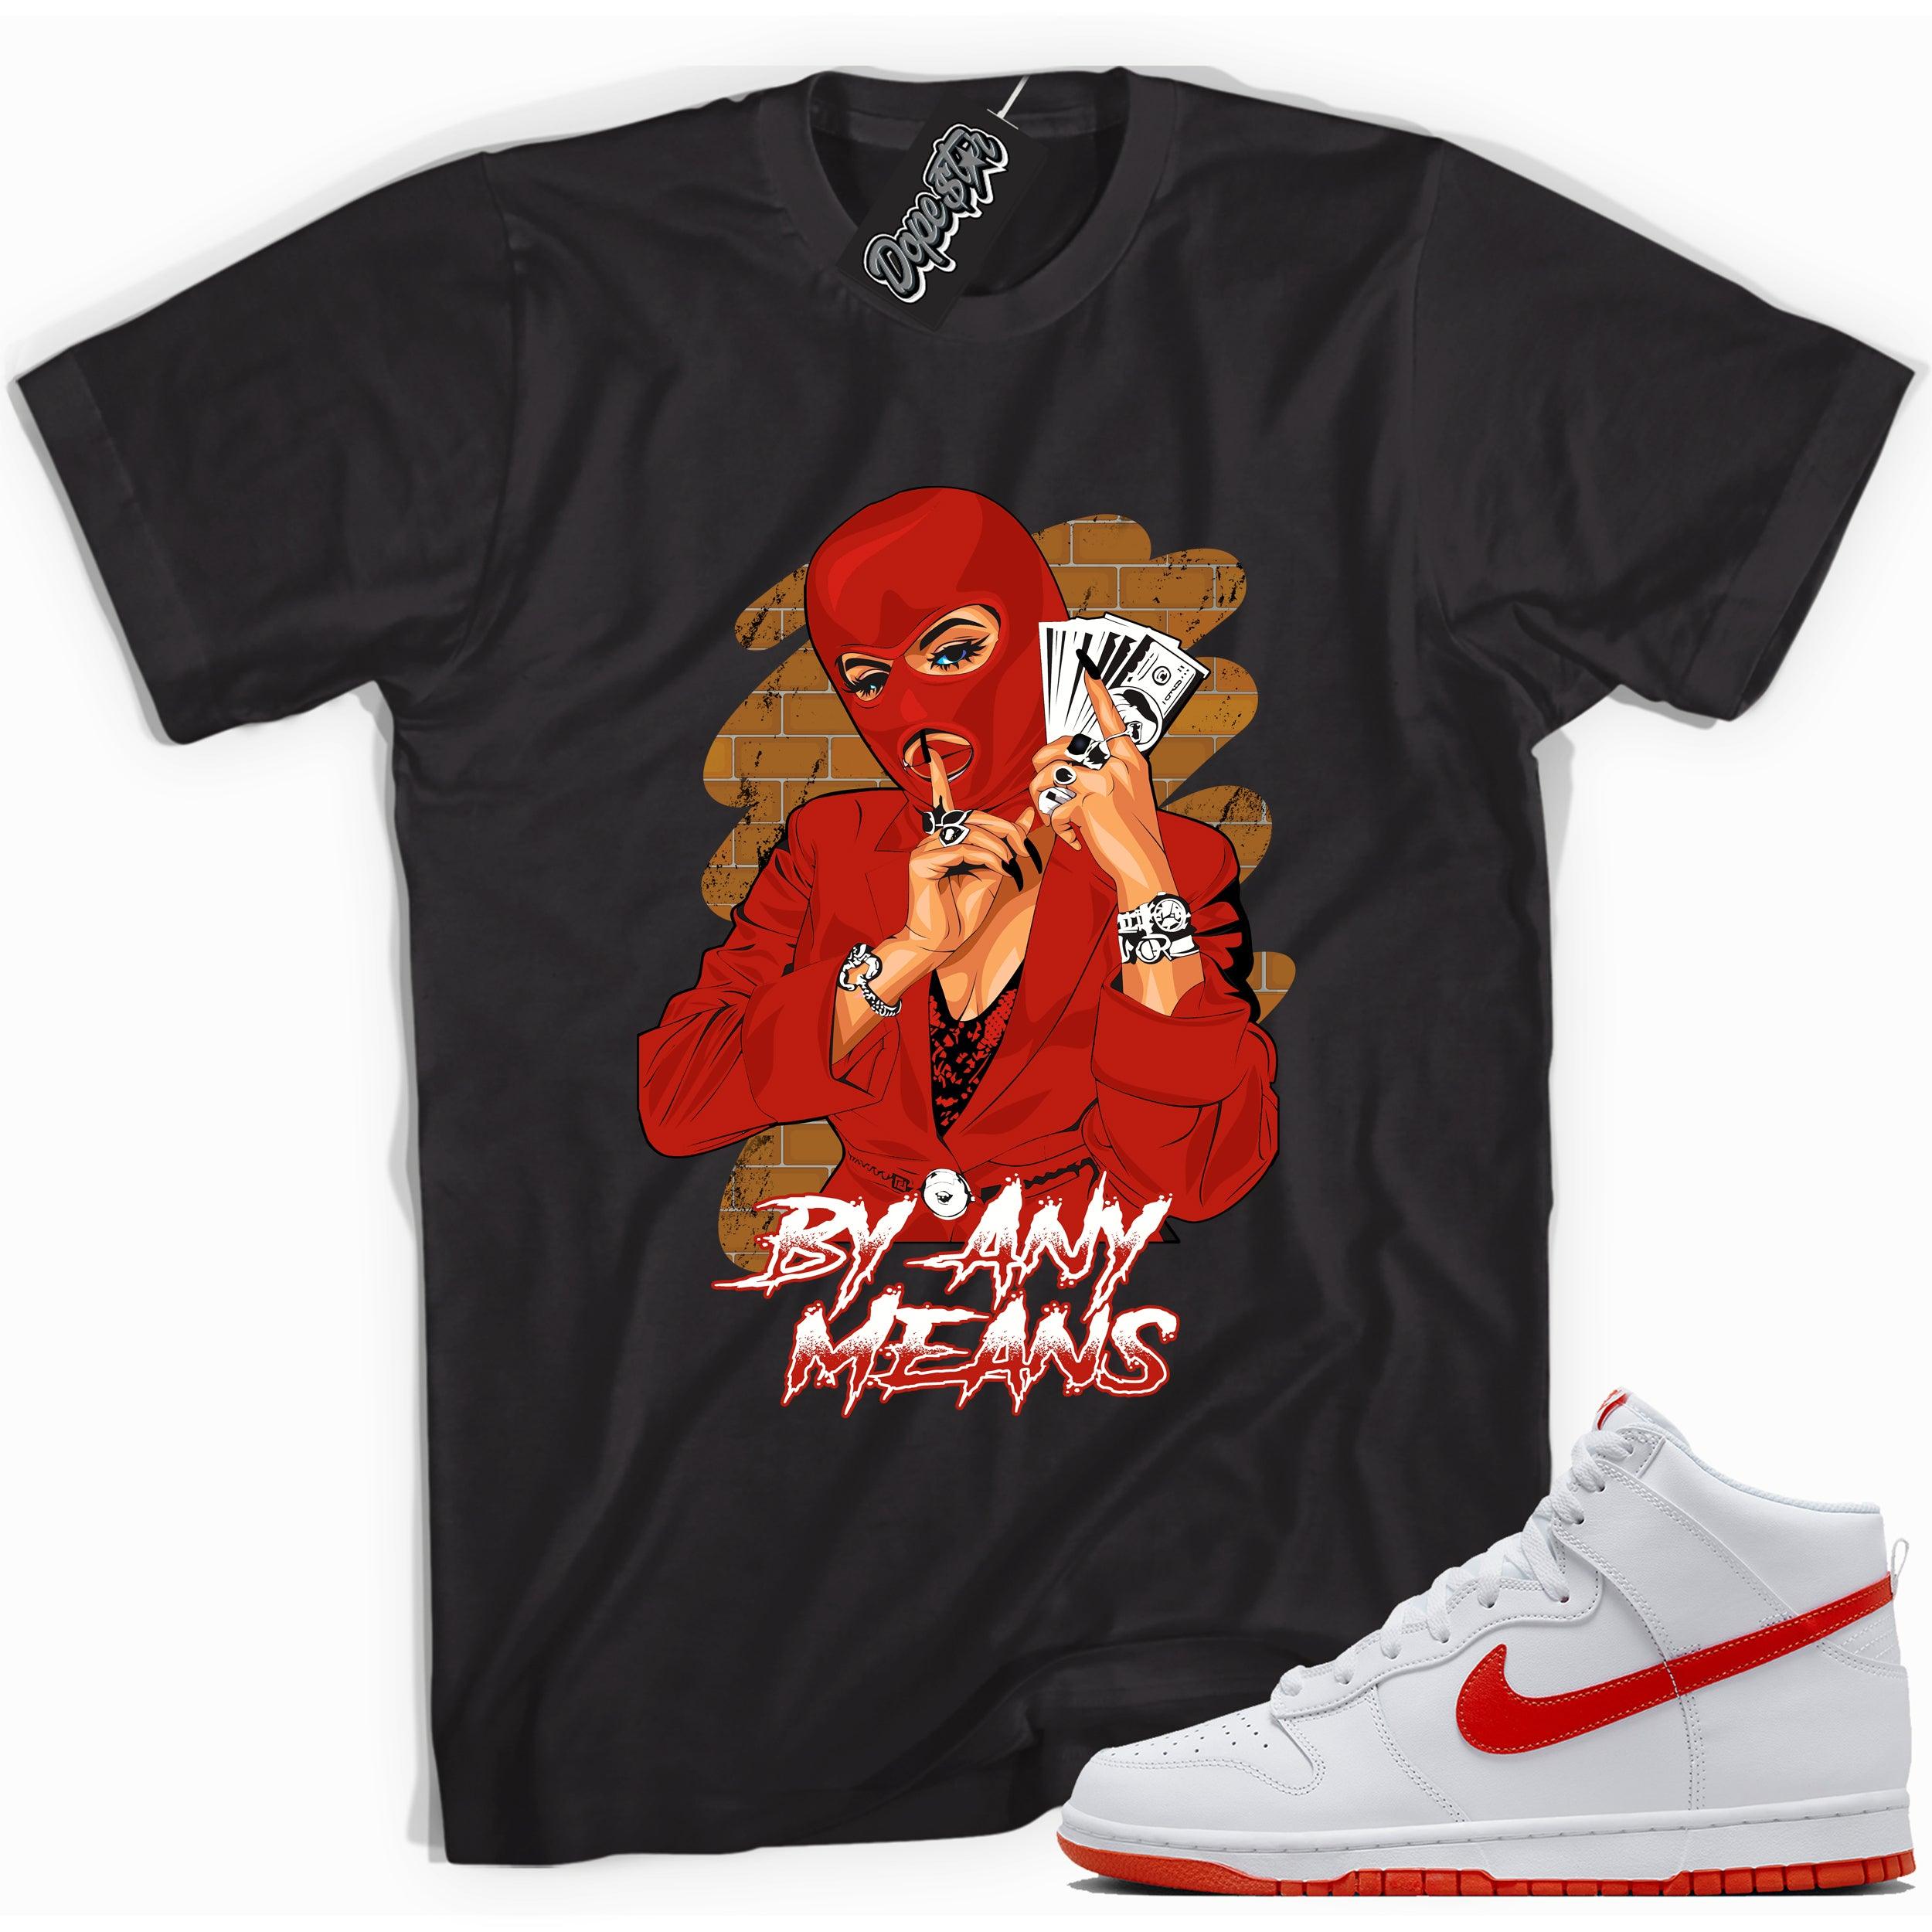 Cool black graphic tee with 'by any means' print, that perfectly matches Nike Dunk High White Picante Red sneakers.